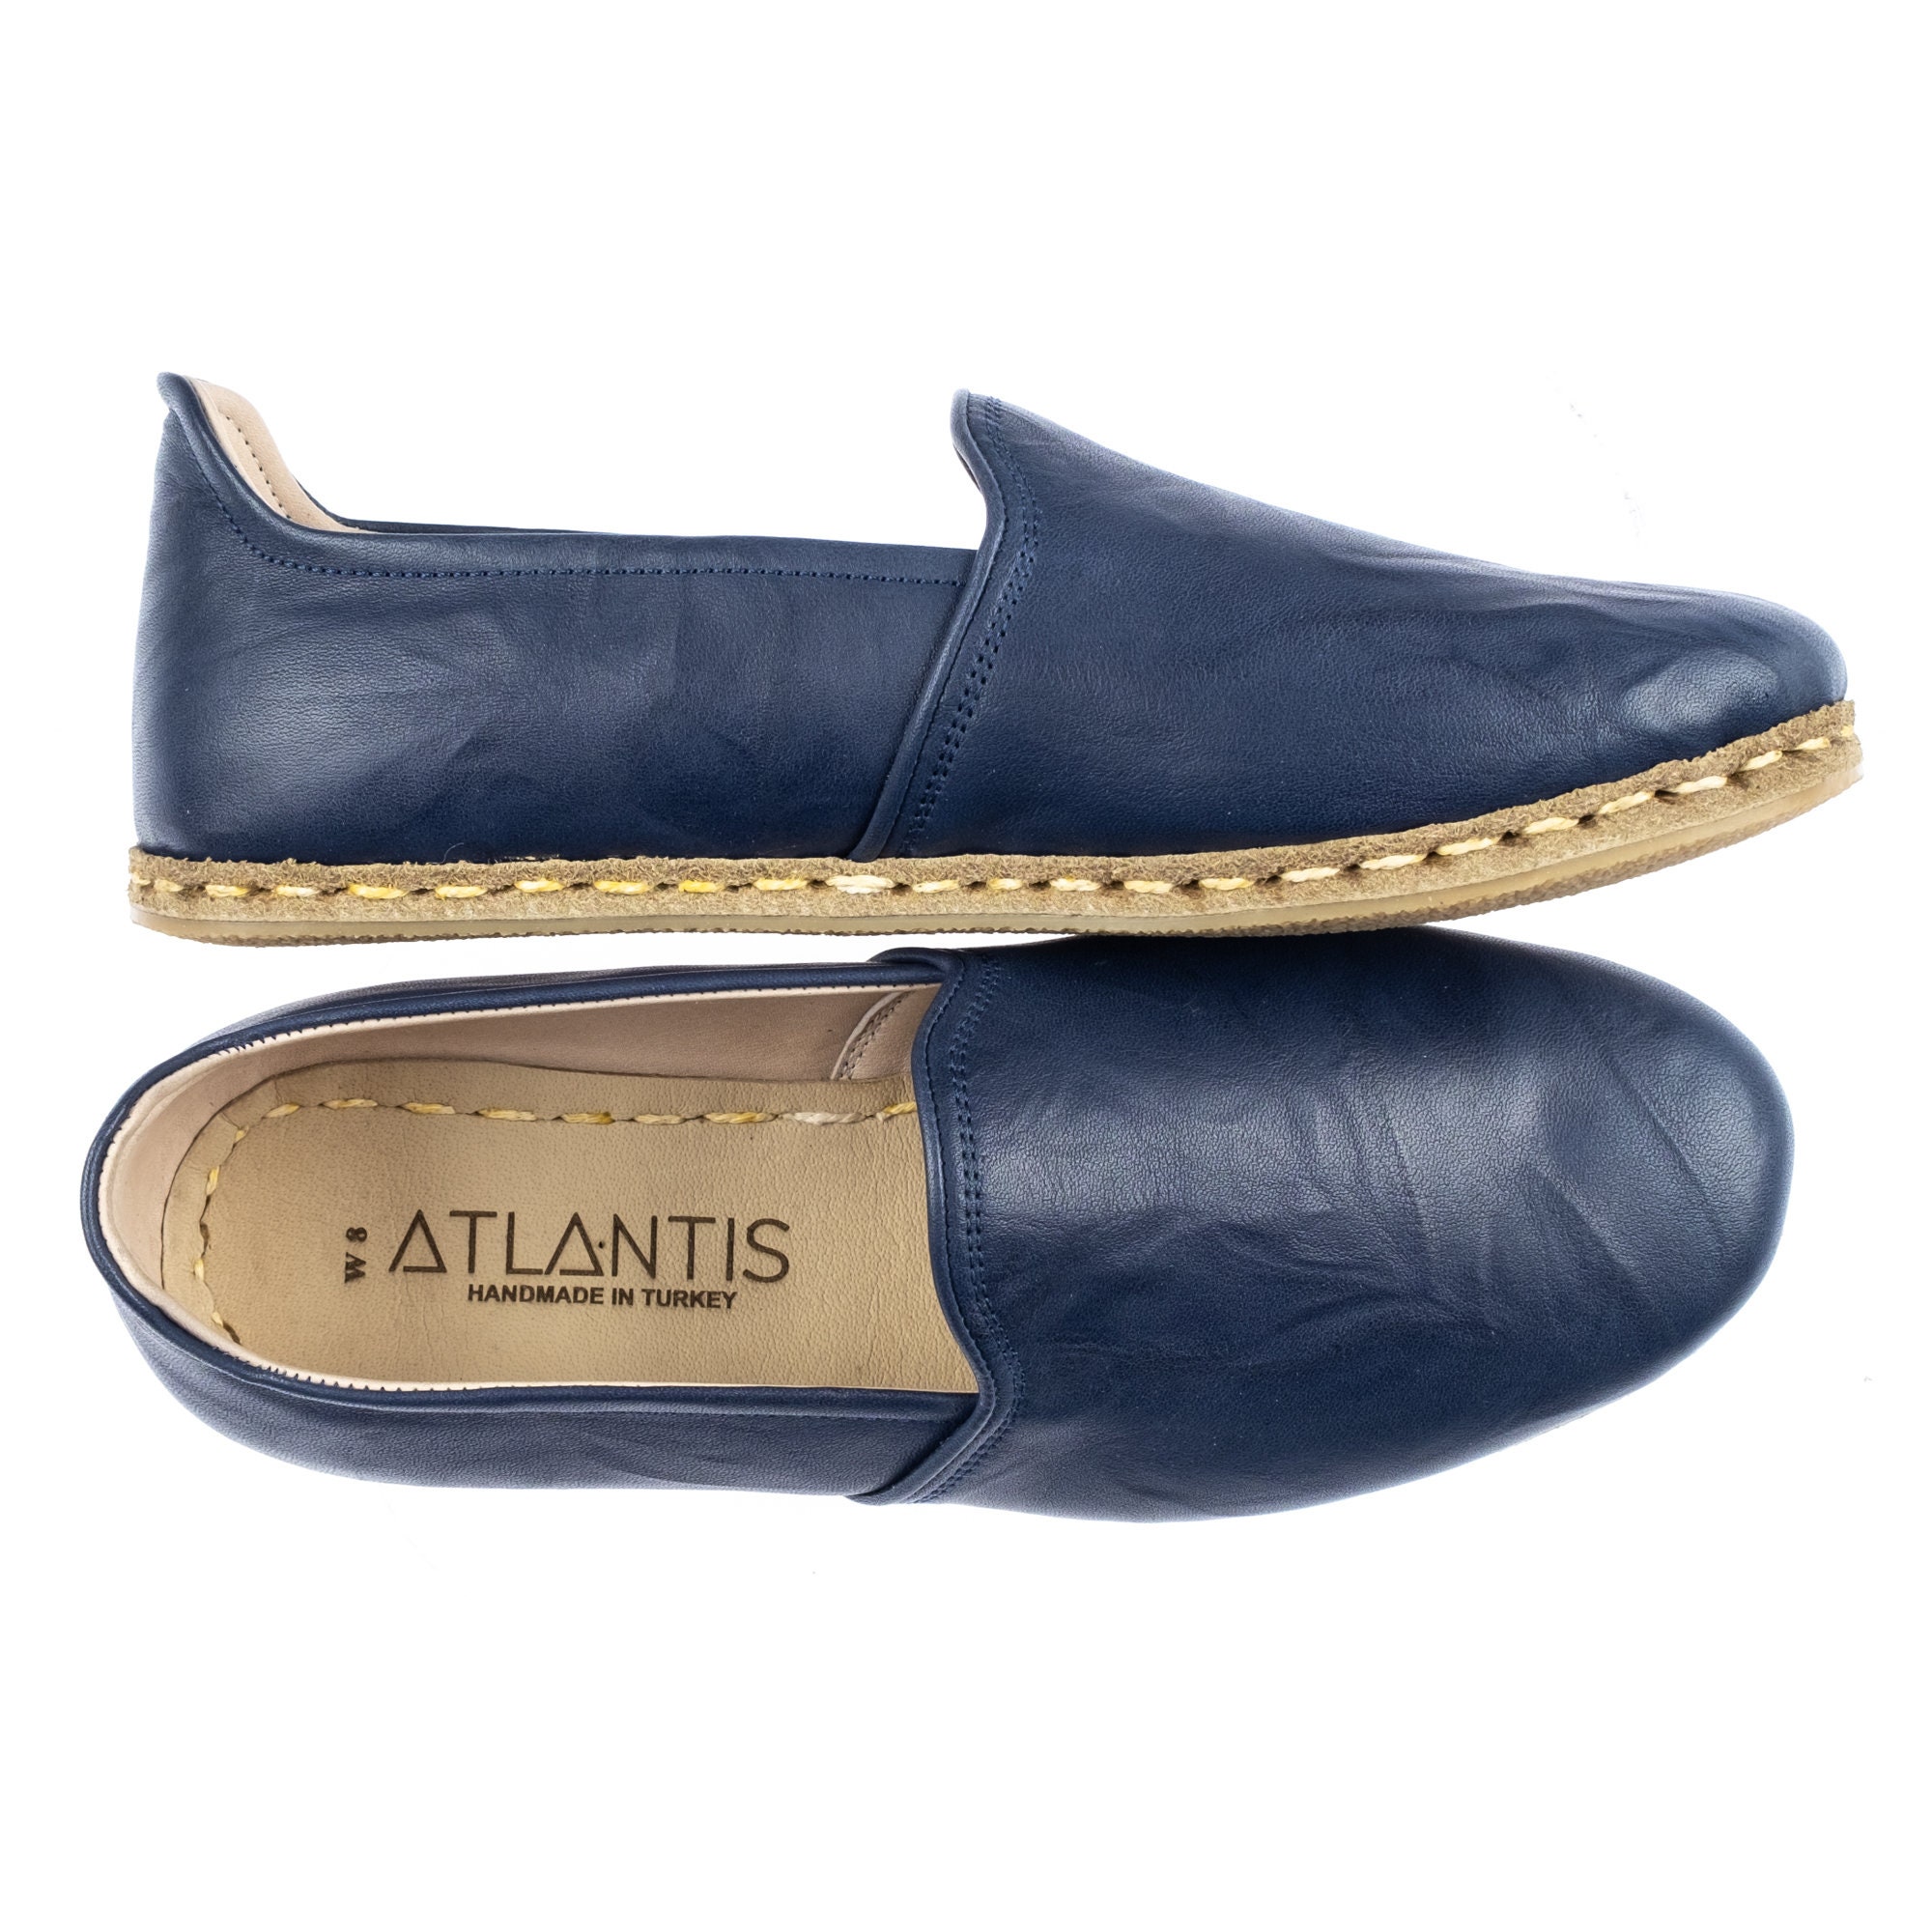 Handmade Leather Shoes Women's Leather Shoes White Navy Blue Leather Shoes With Strings